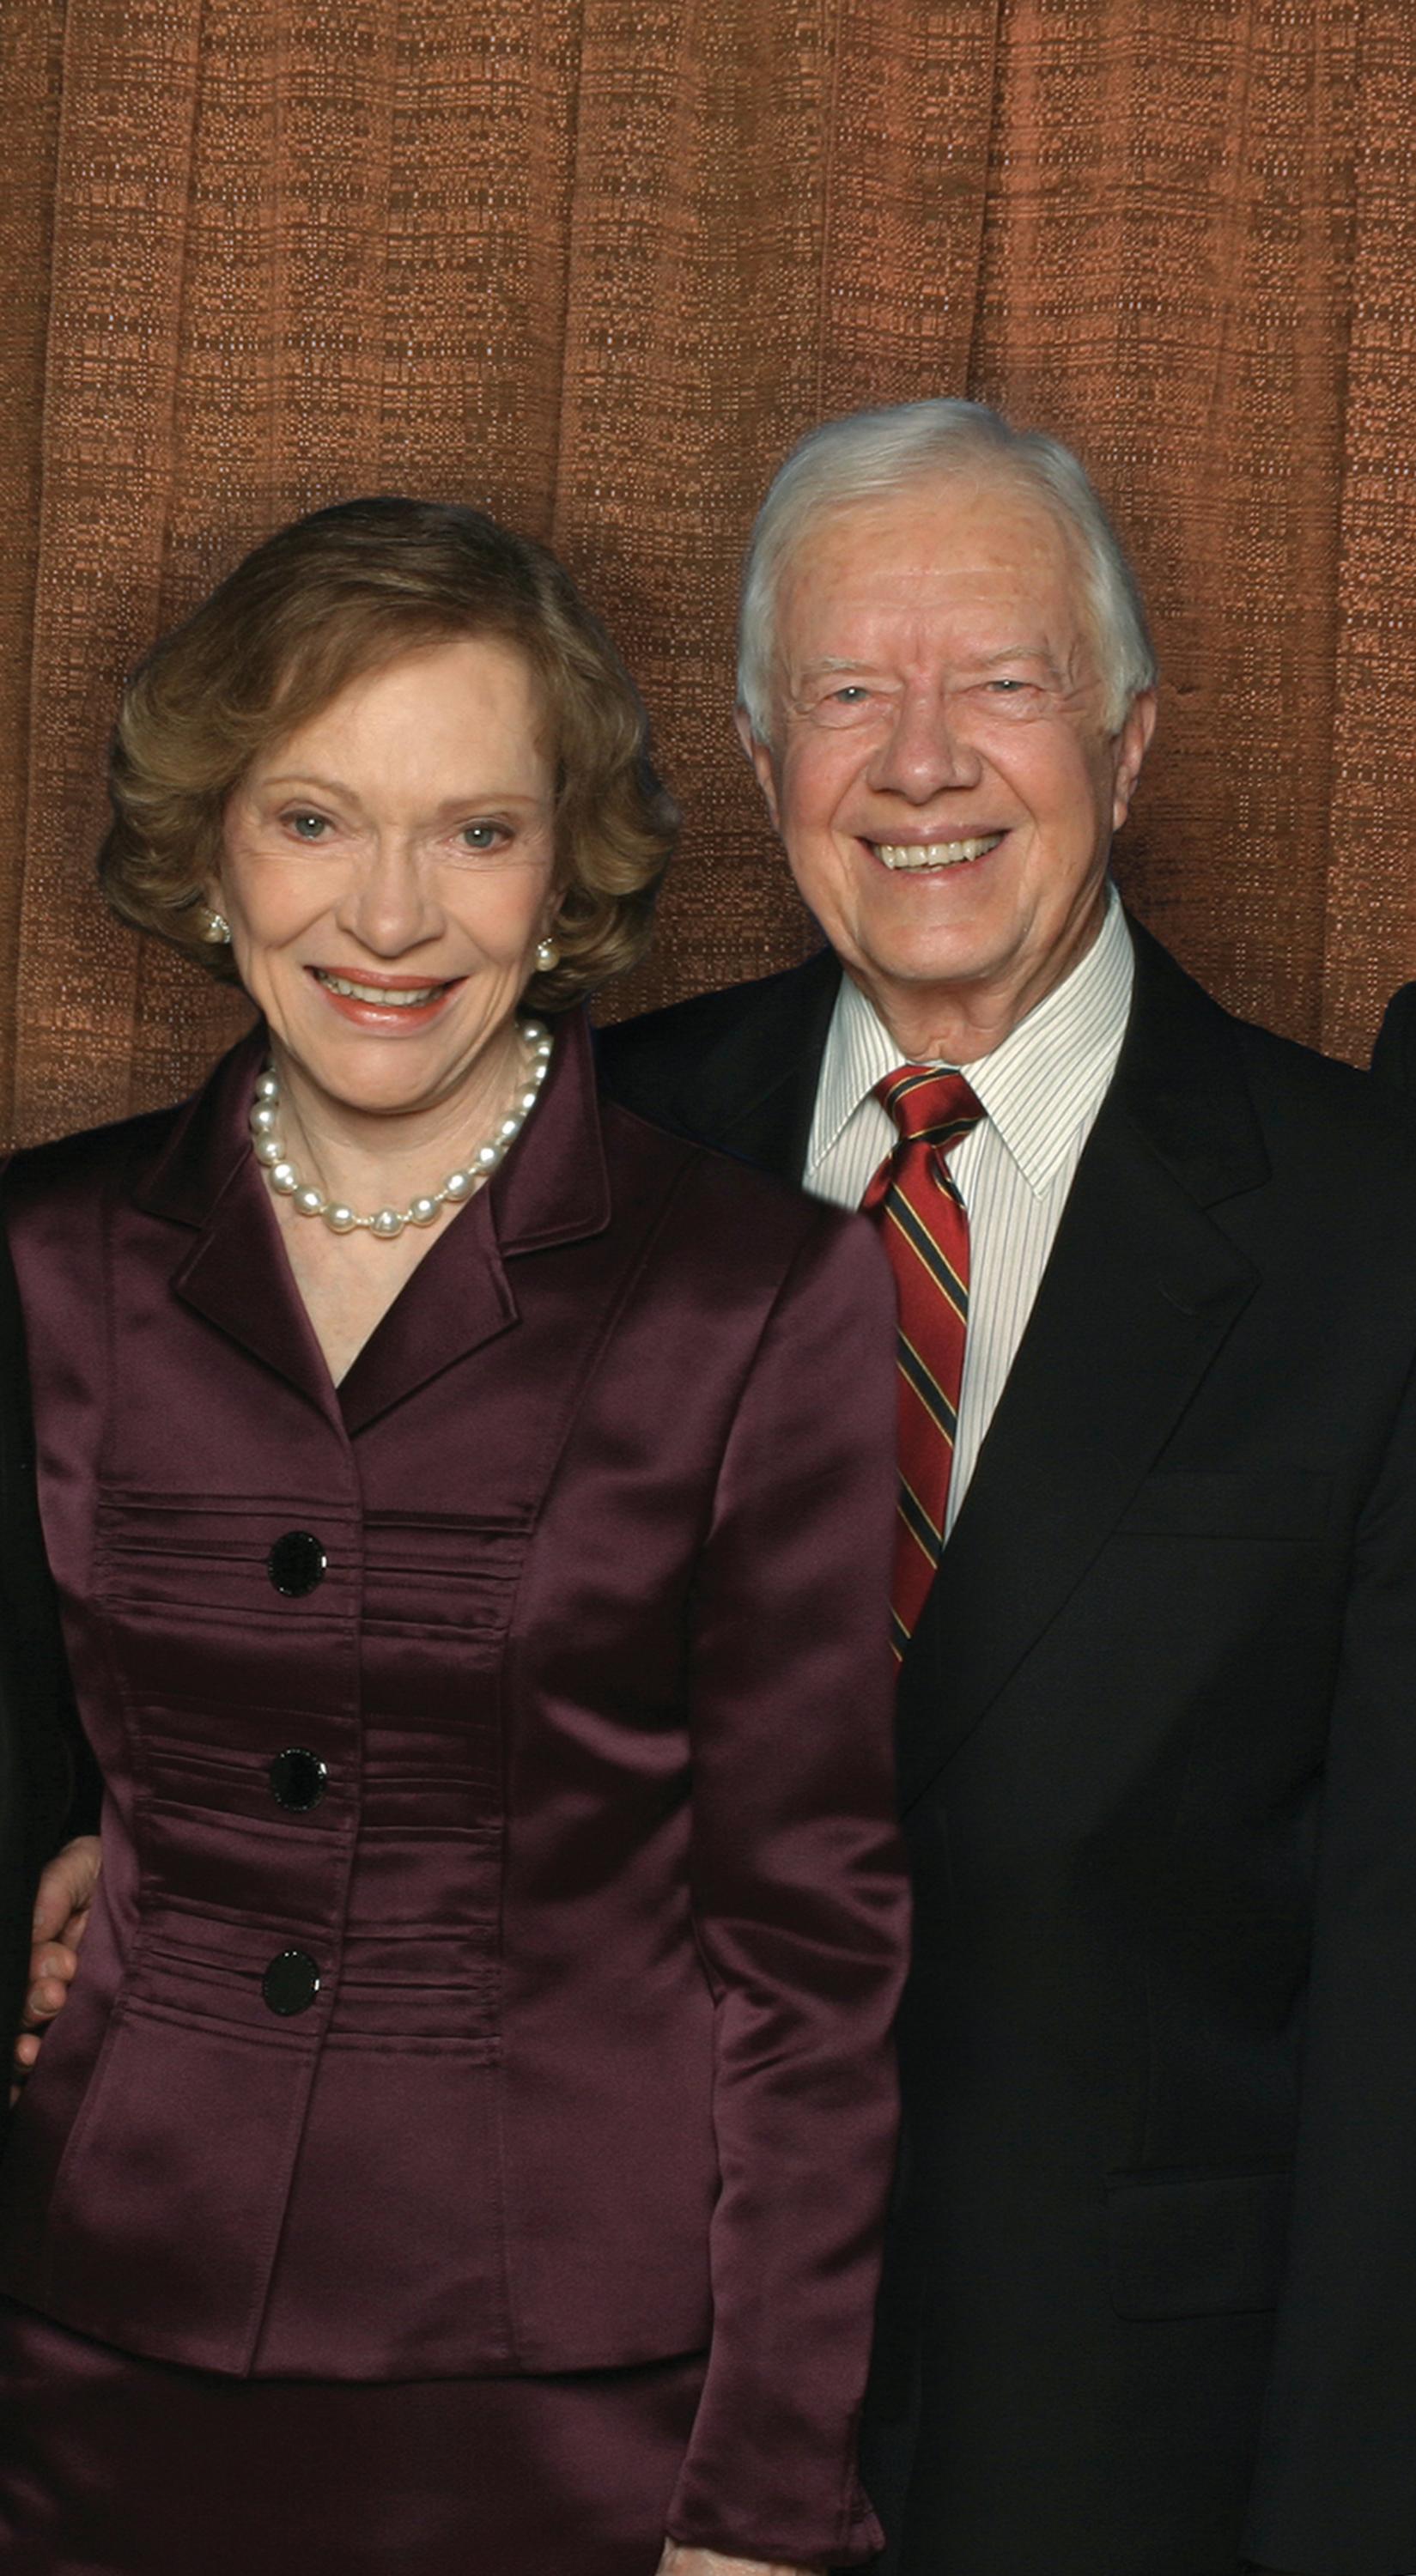 Jimmy and Rosalynn Carter will receive the 2017 Ivan Allen Jr. Prize for Social Courage.

In this photo, the former president and first lady pose at a 2003 event celebrating President Carter’s Nobel Peace Prize, awarded in December 2002.

Photo credit: The Carter Center. 